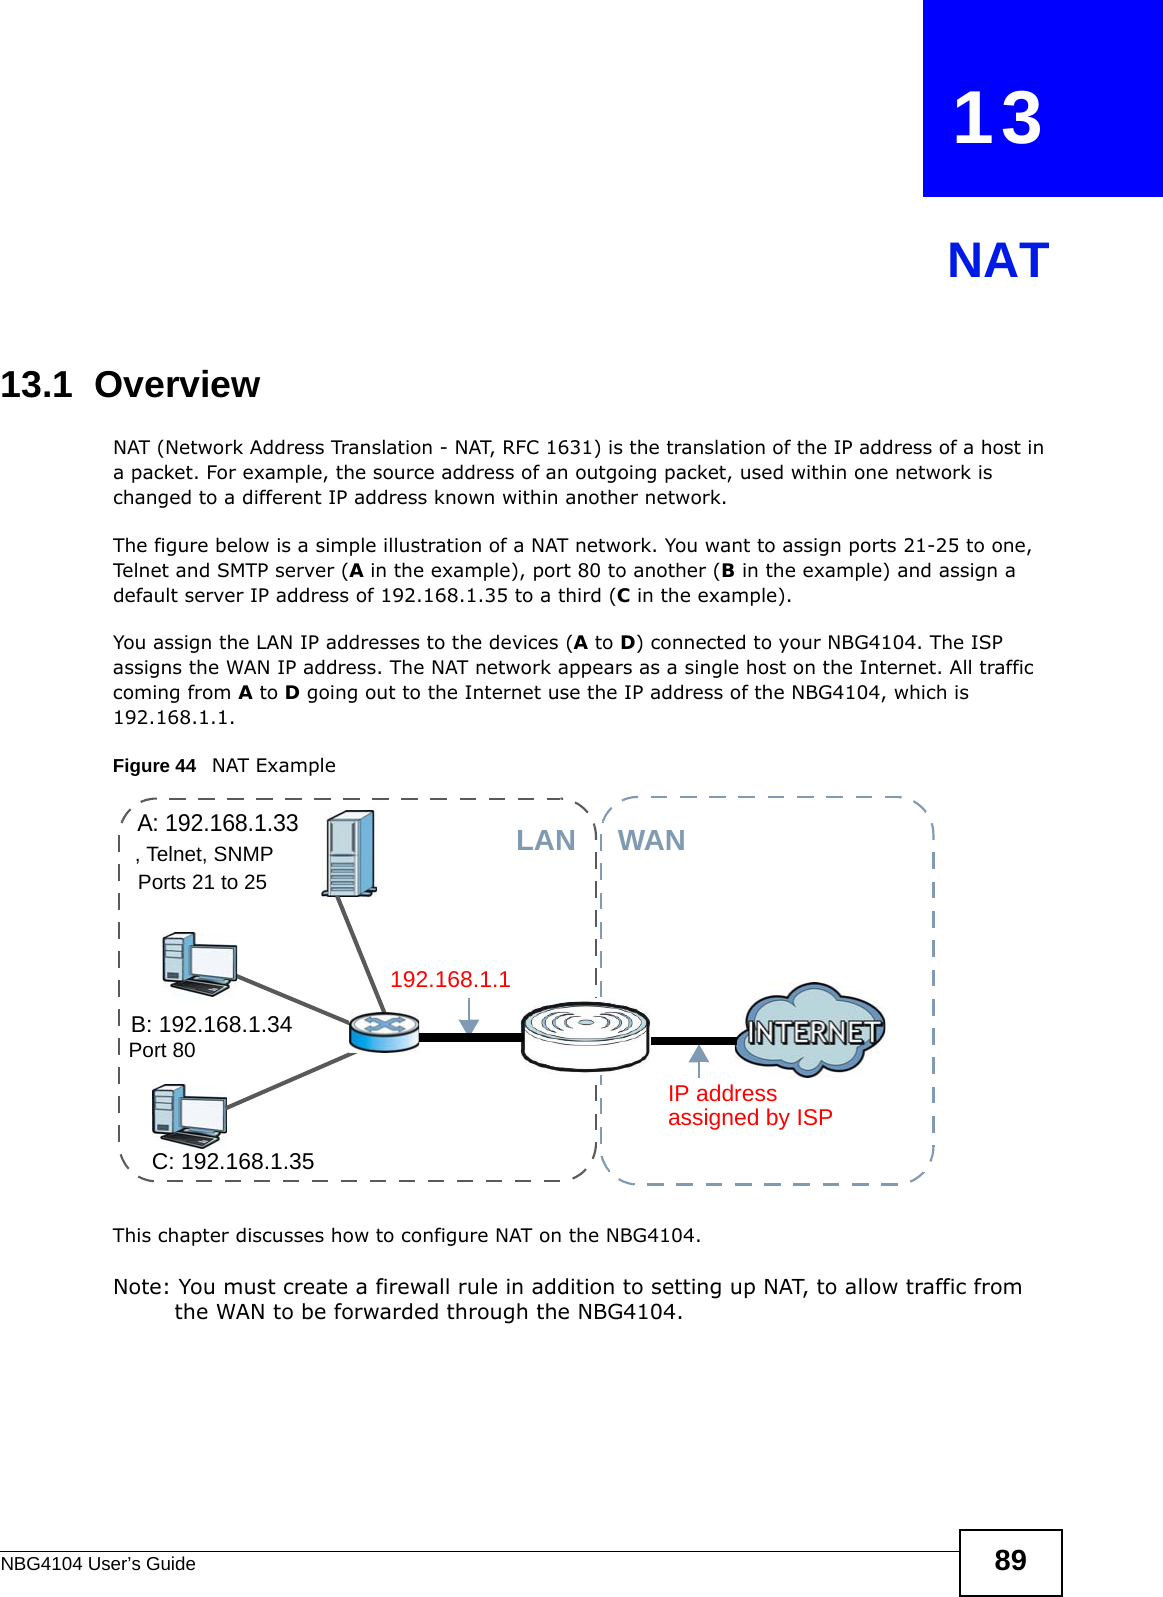 NBG4104 User’s Guide 89CHAPTER   13NAT13.1  Overview   NAT (Network Address Translation - NAT, RFC 1631) is the translation of the IP address of a host in a packet. For example, the source address of an outgoing packet, used within one network is changed to a different IP address known within another network.The figure below is a simple illustration of a NAT network. You want to assign ports 21-25 to one, Telnet and SMTP server (A in the example), port 80 to another (B in the example) and assign a default server IP address of 192.168.1.35 to a third (C in the example). You assign the LAN IP addresses to the devices (A to D) connected to your NBG4104. The ISP assigns the WAN IP address. The NAT network appears as a single host on the Internet. All traffic coming from A to D going out to the Internet use the IP address of the NBG4104, which is 192.168.1.1.Figure 44   NAT ExampleThis chapter discusses how to configure NAT on the NBG4104.Note: You must create a firewall rule in addition to setting up NAT, to allow traffic from the WAN to be forwarded through the NBG4104.A: 192.168.1.33B: 192.168.1.34C: 192.168.1.35IP address 192.168.1.1WANLANassigned by ISP, Telnet, SNMPPort 80Ports 21 to 25